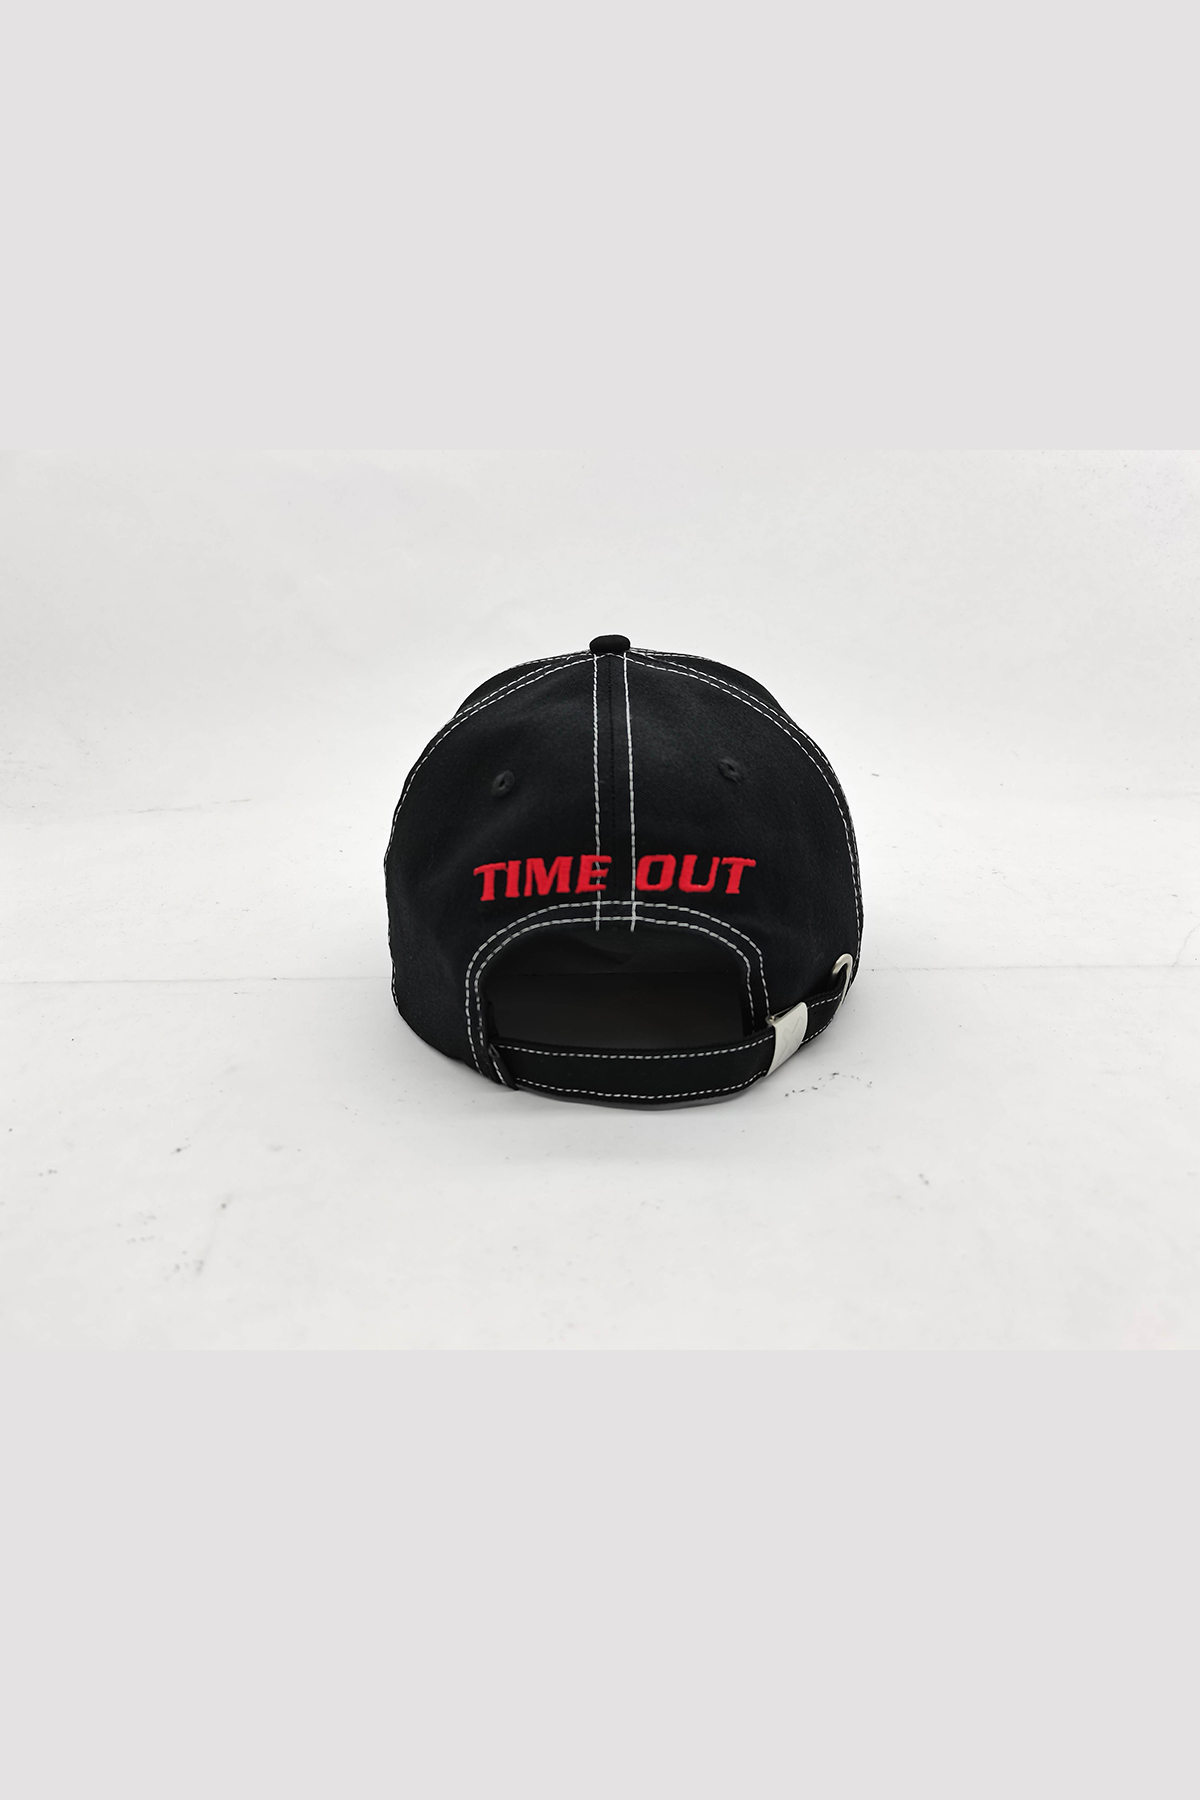 Time-Out-X-Cotton-Gym-Cap-Black-with-Red-logo—back